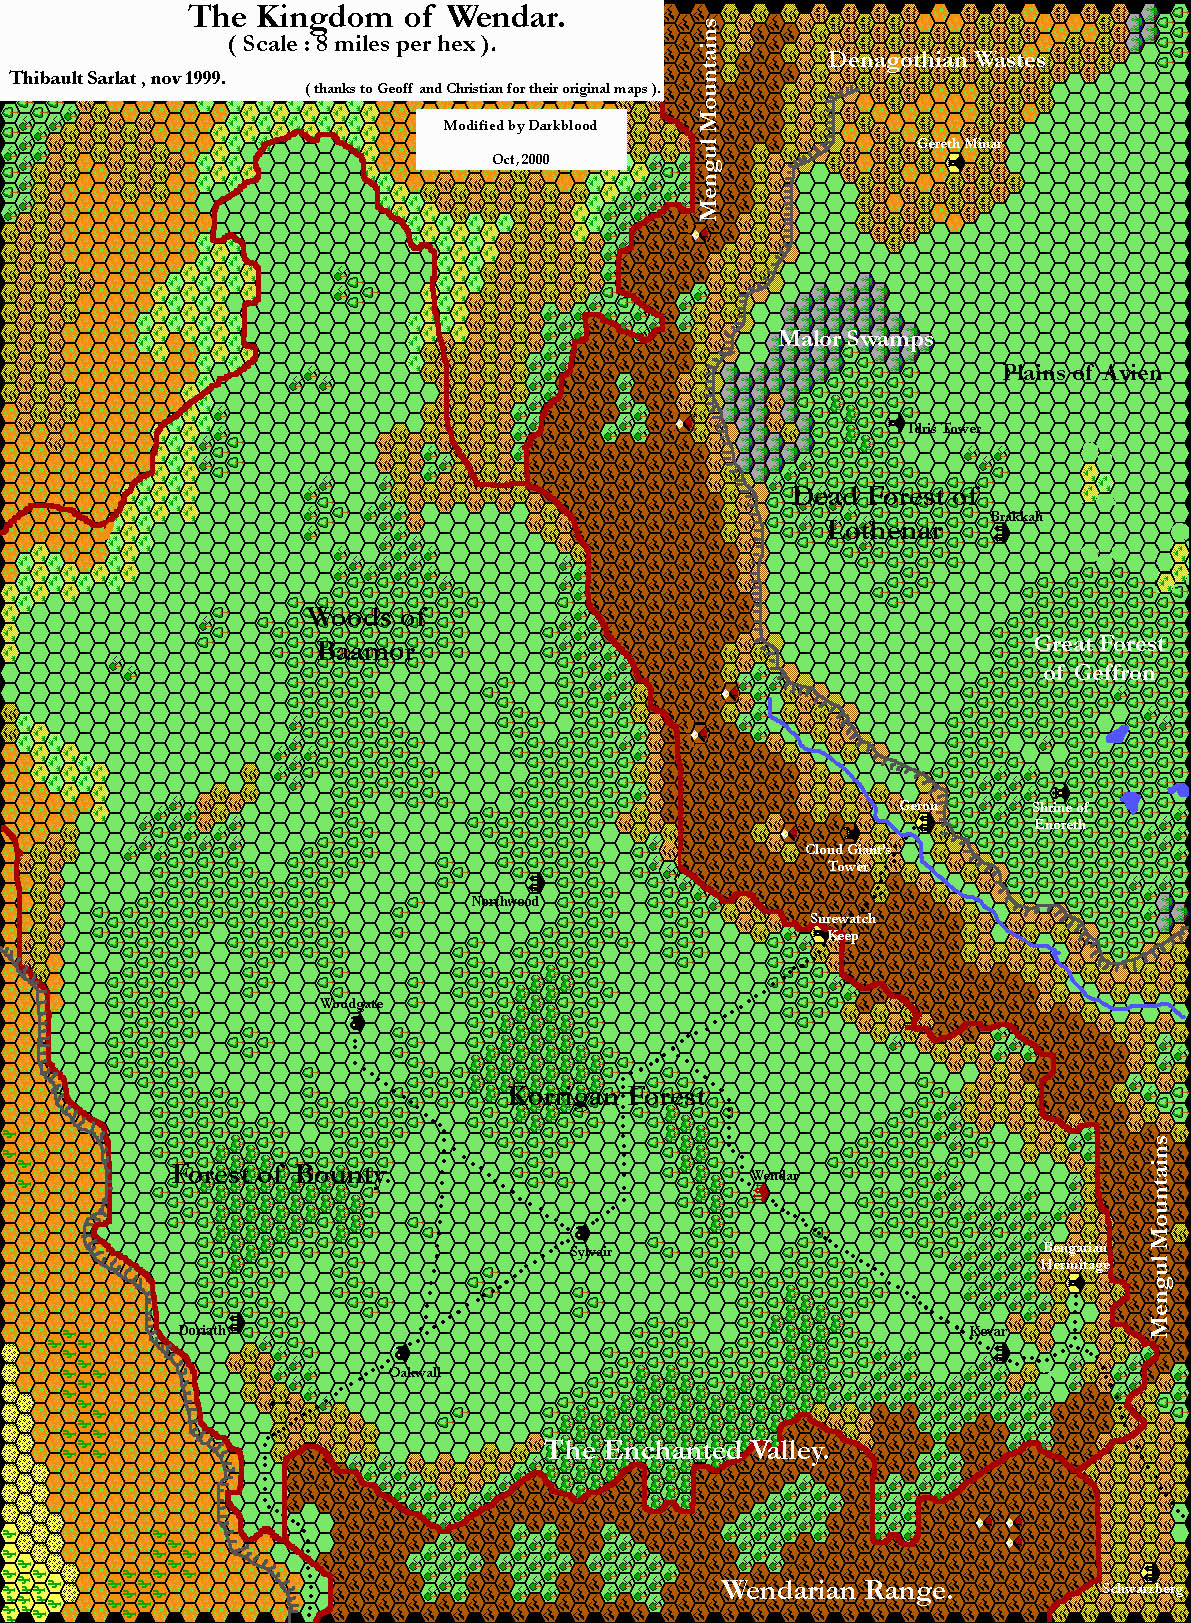 The Kingdom of Wendar, 8 miles per hex by Thibault Sarlat with modifications by Ricardo Matheus, September 2001